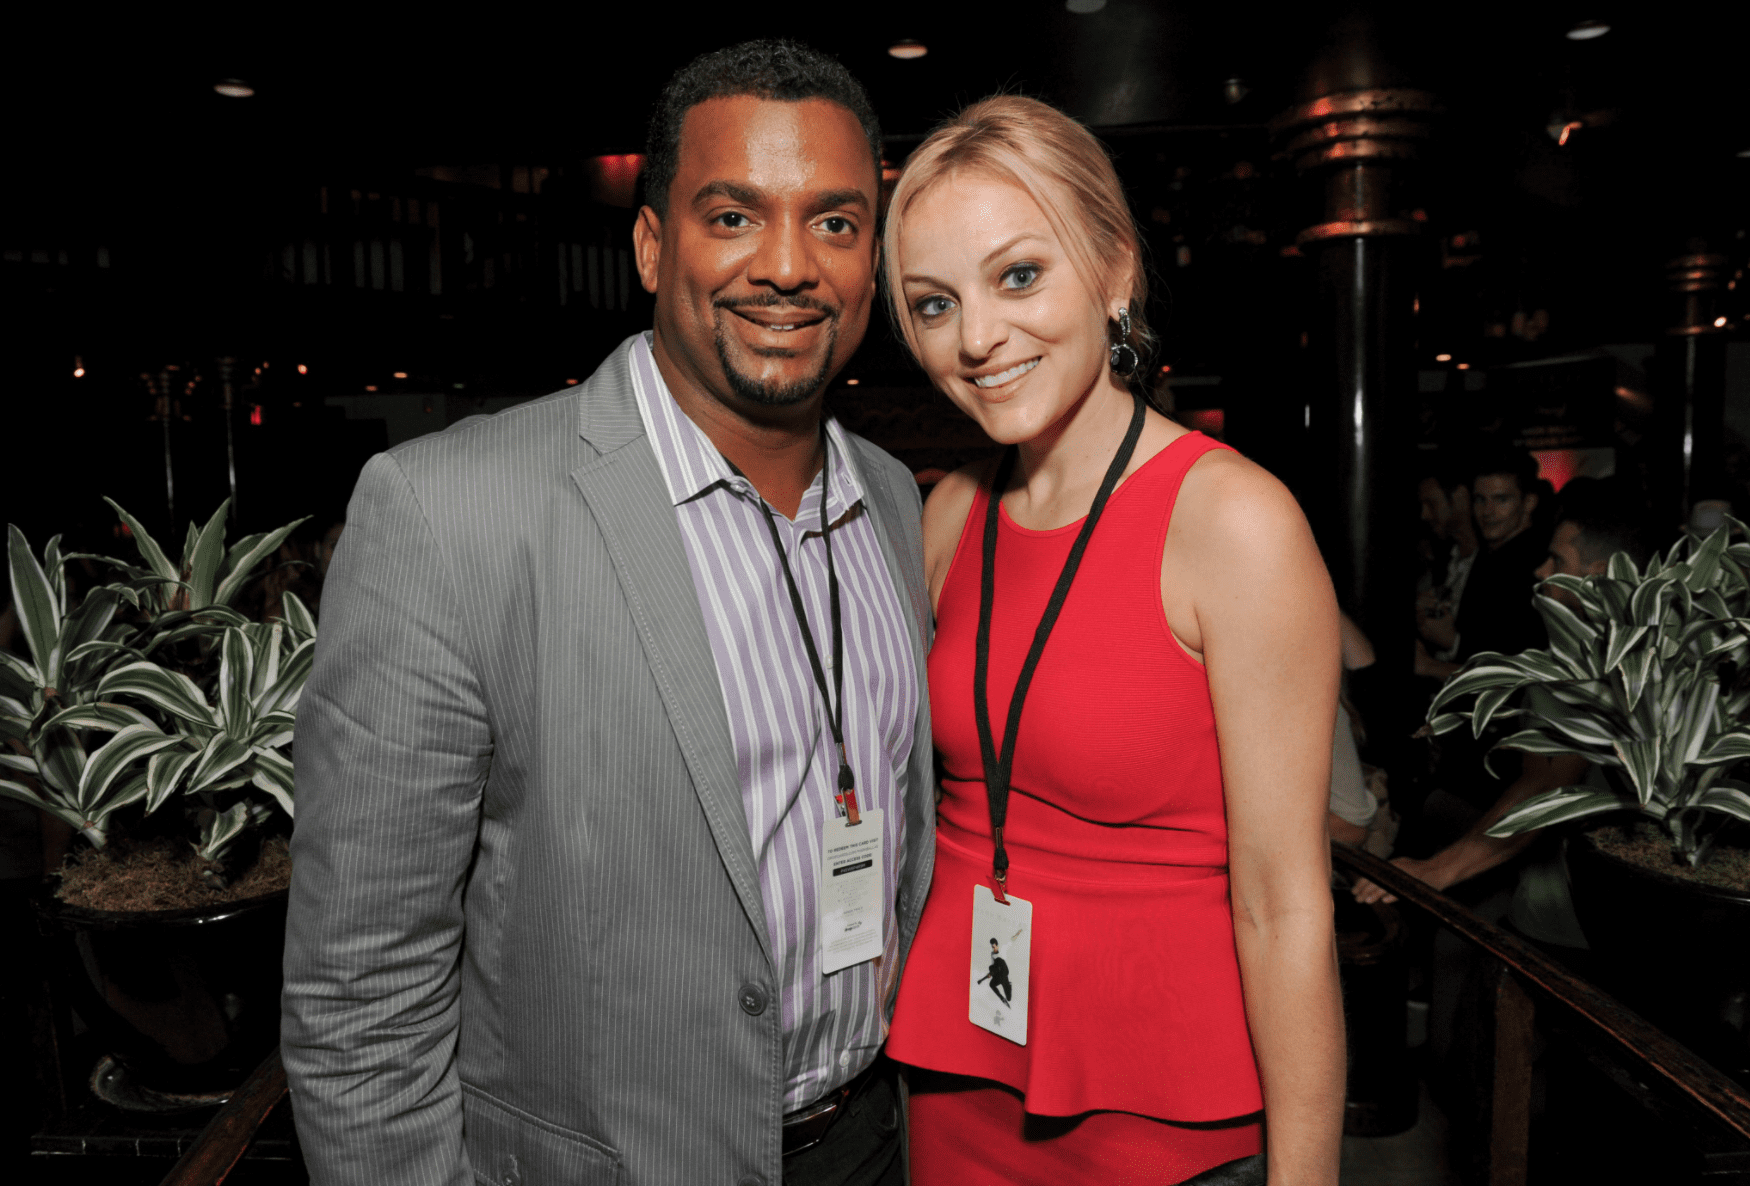 Alfonso Ribeiro and his wife attending the debut of Mark Ballas' EP "Kicking Clouds" on September 16, 2014 in California. Photo by Allen Berezovsky. | Source: Getty Images